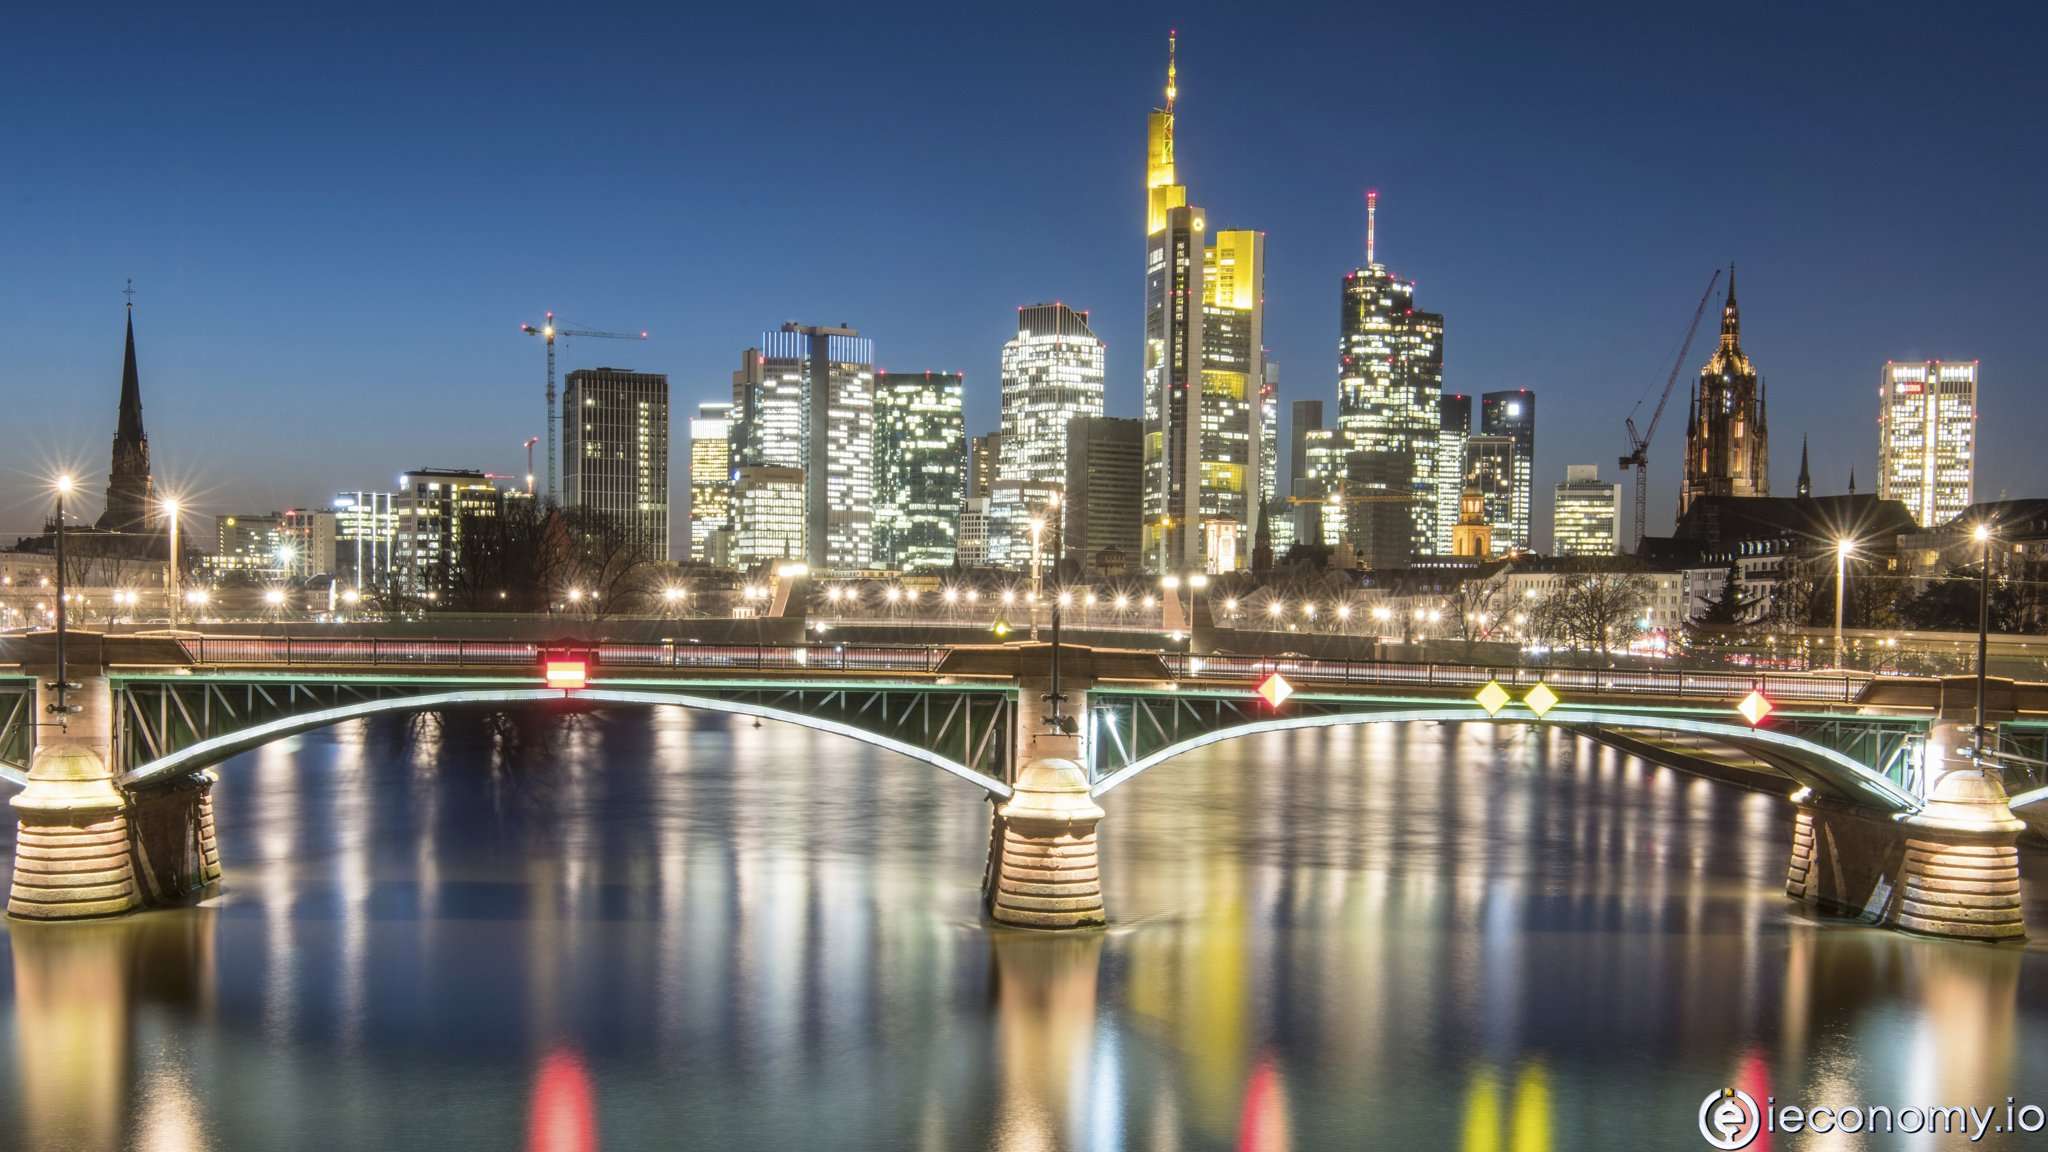 Banks in Germany has decreased further in the wake of the Corona crisis